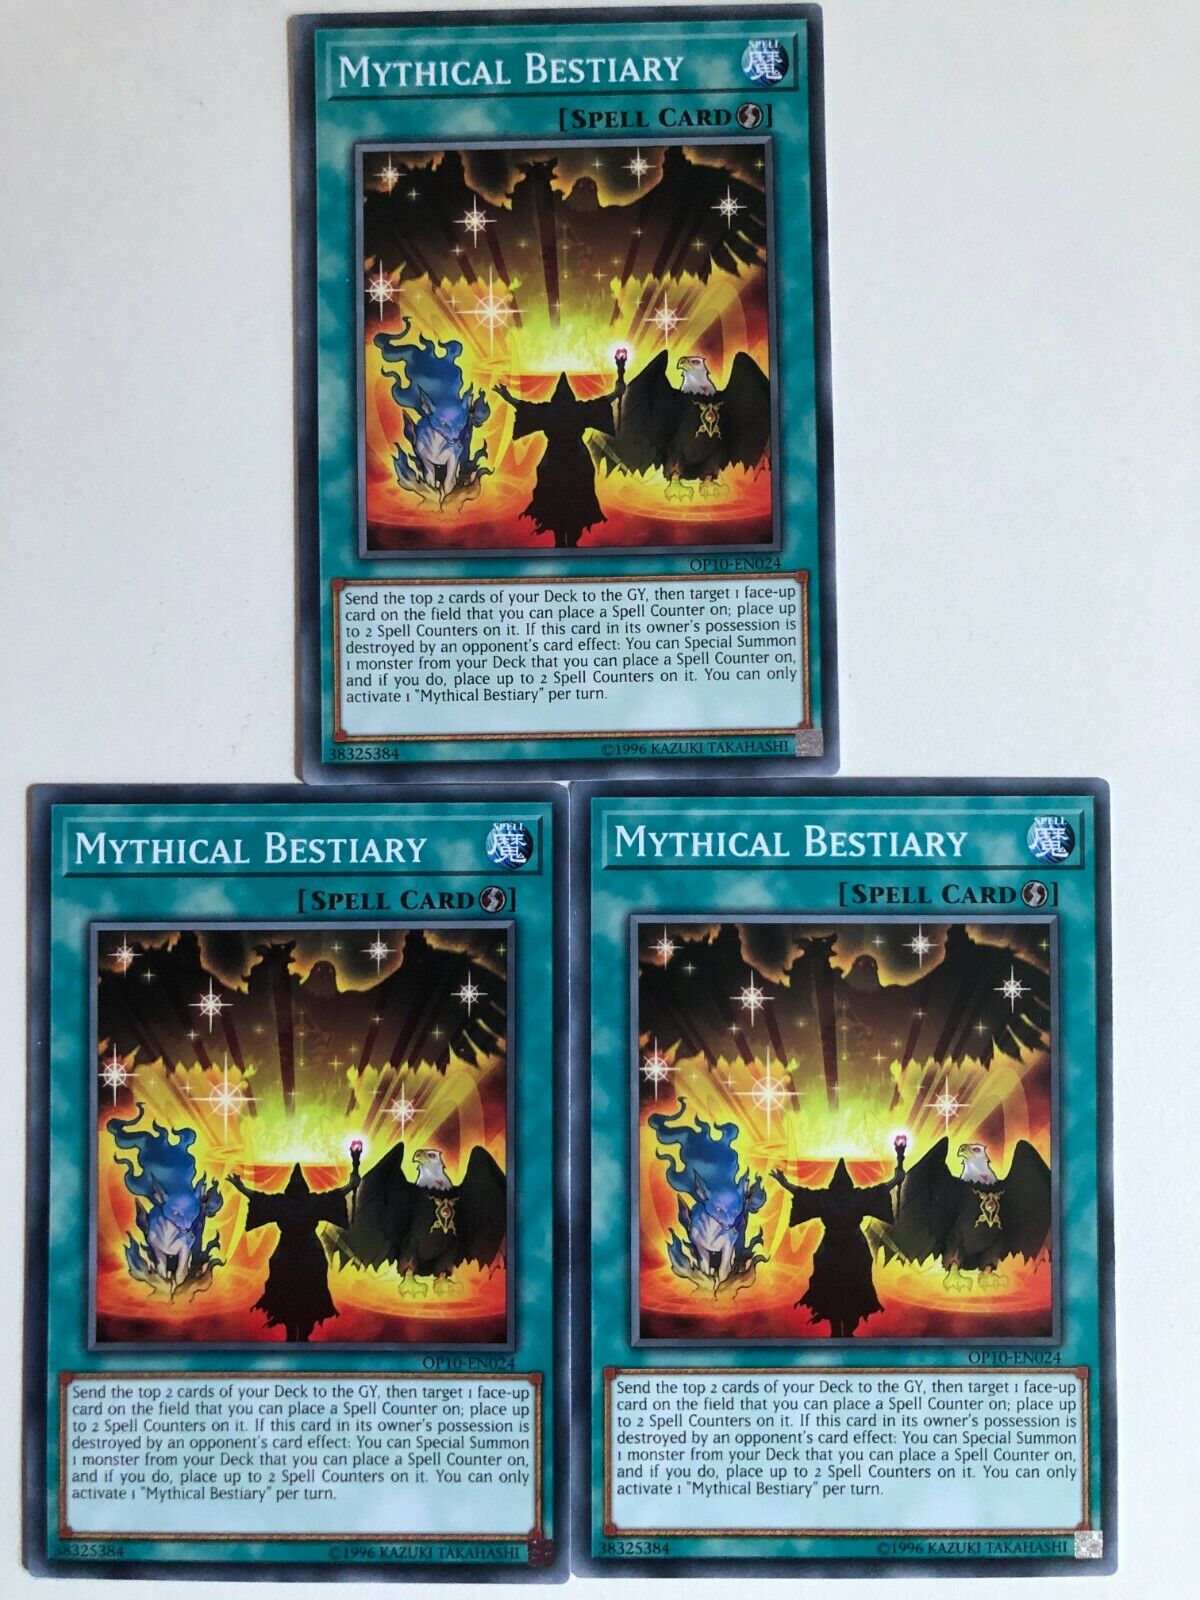 Yugioh Mythical Bestiary OP10-EN024 Common Mint Condition x3